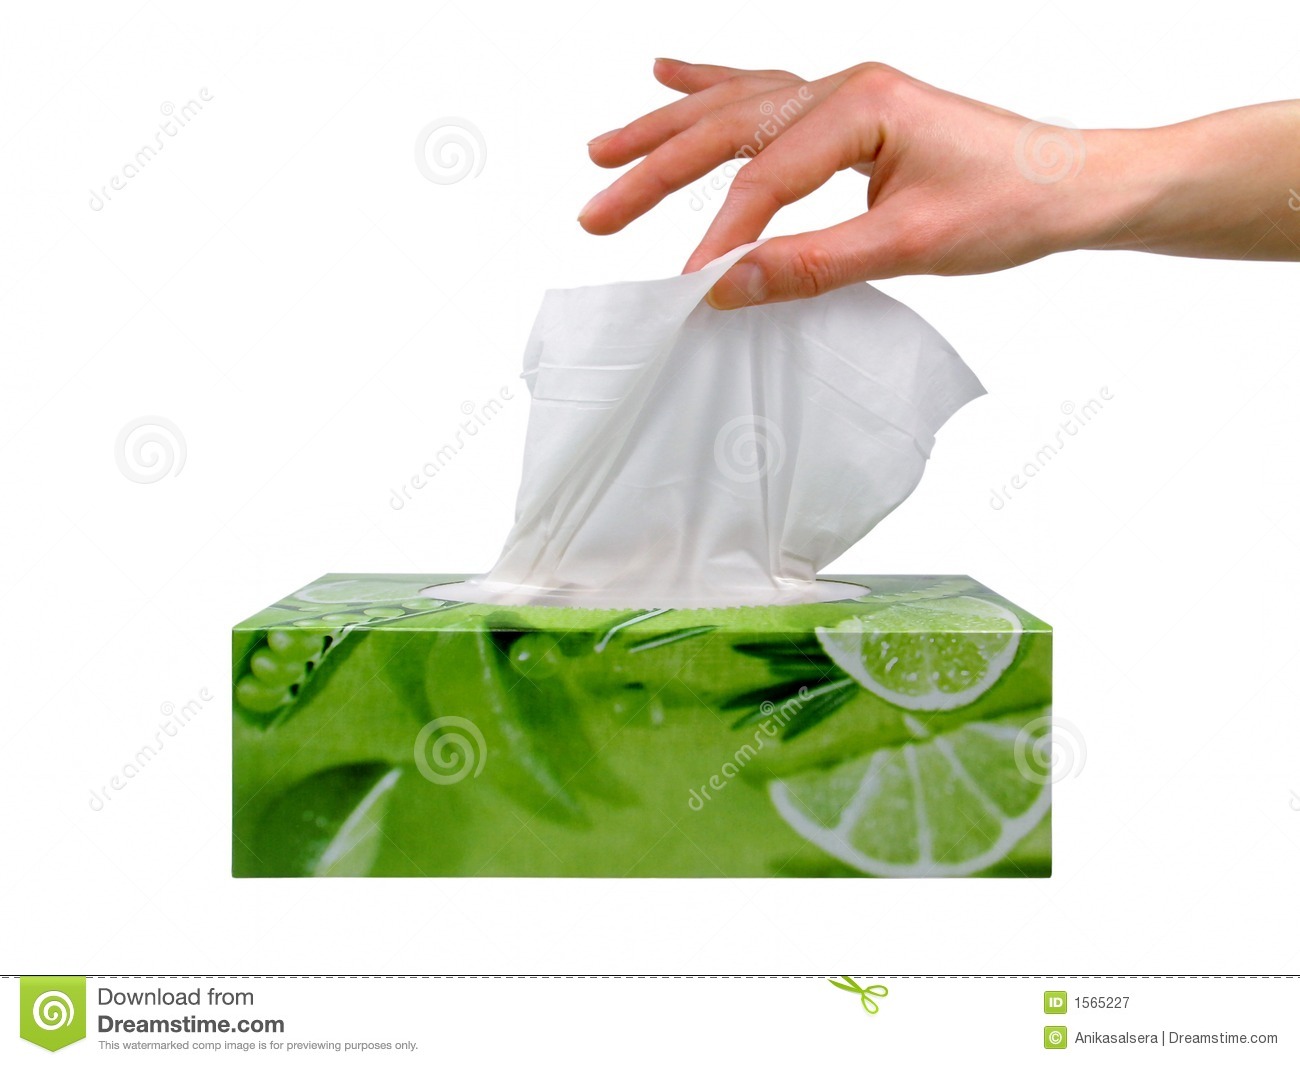 Delicate Woman S Hand Pulls A Tissue From A Green Tissue Box